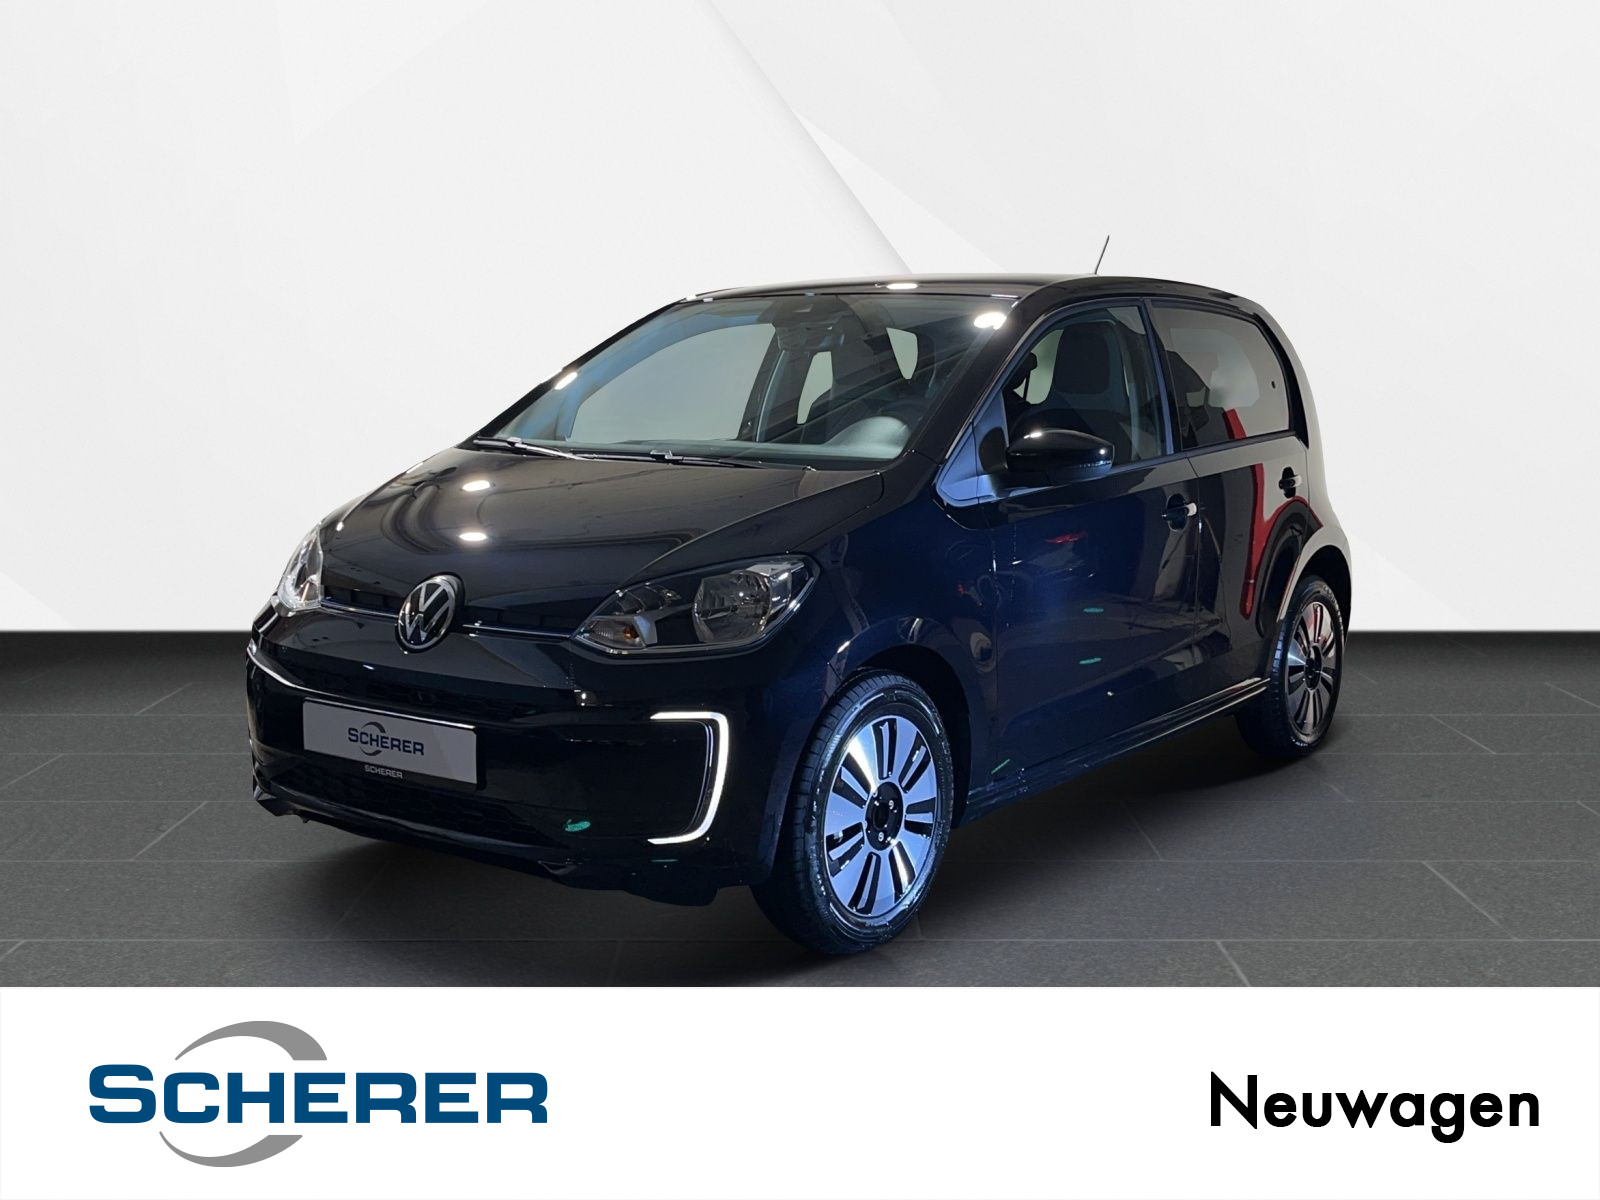 Volkswagen up 2.3 e-up Edition 83 3kWh